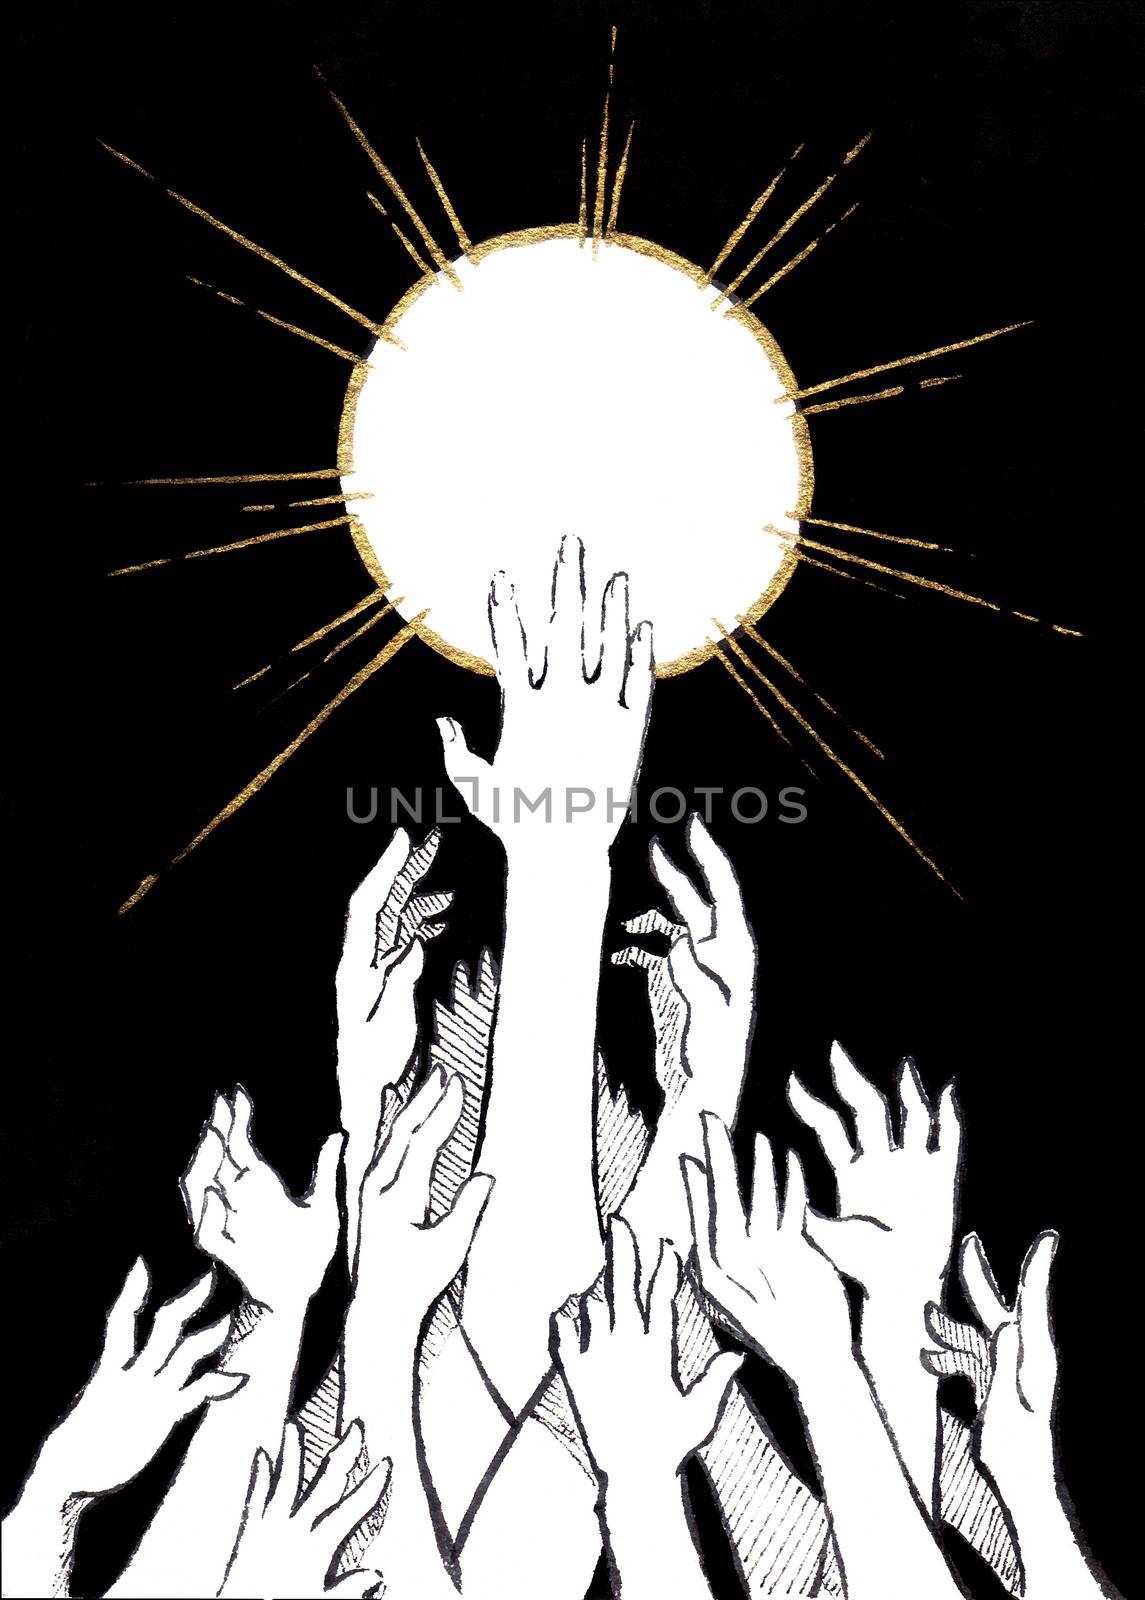 Many human hands try to reach for something in a golden circle. Concepts of hope, desire, passion and enchantment. Suitable for use in posters, flyers, book covers.